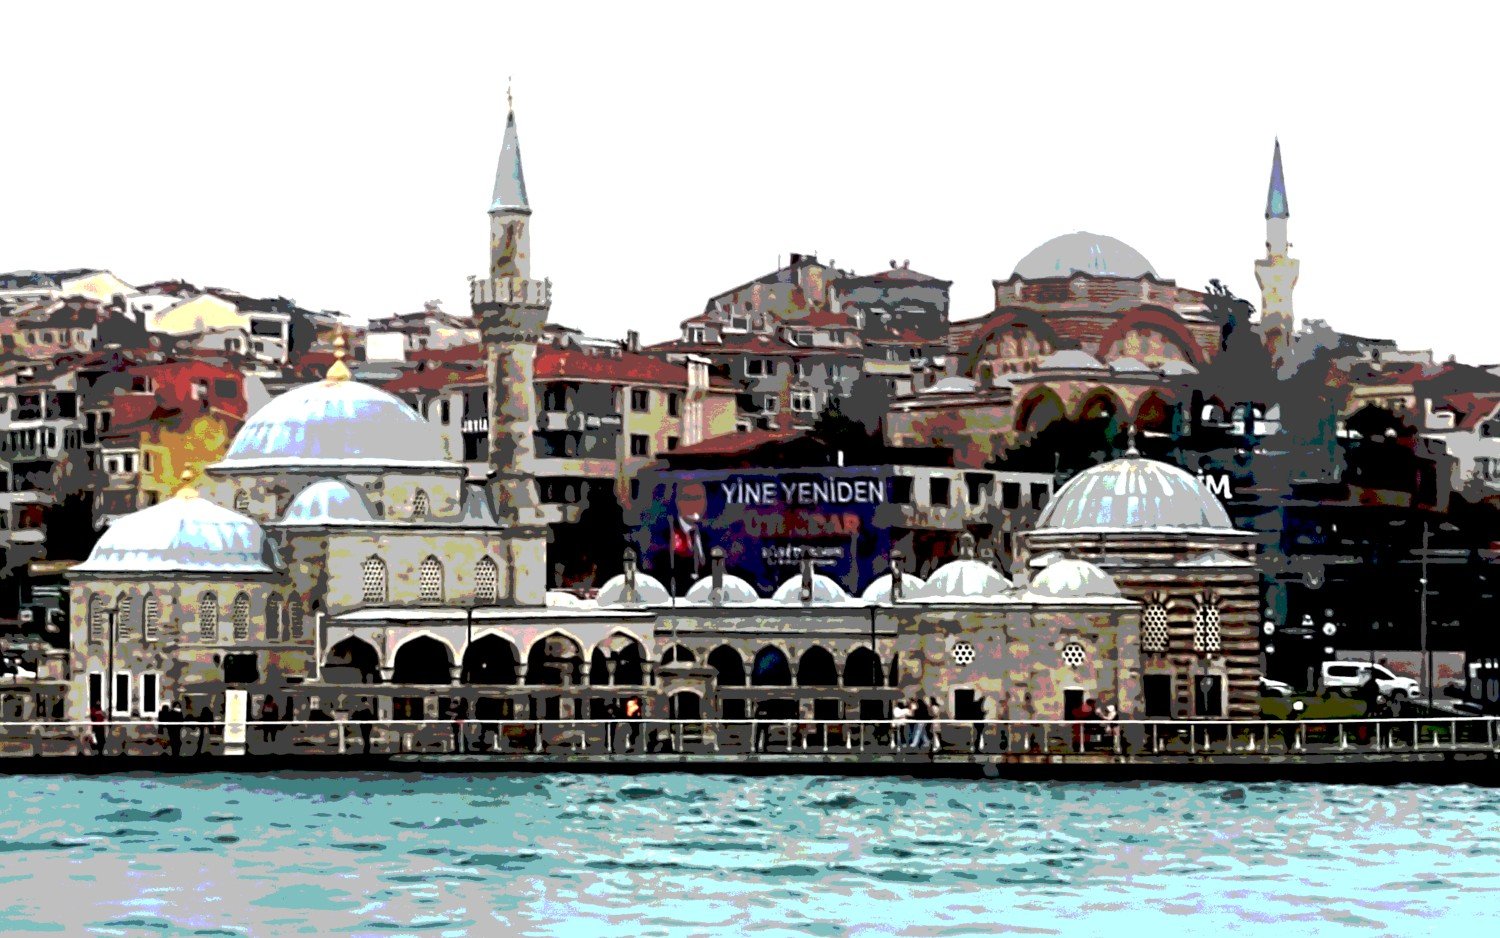 Uskudar from the ferry crossing the Bosporus